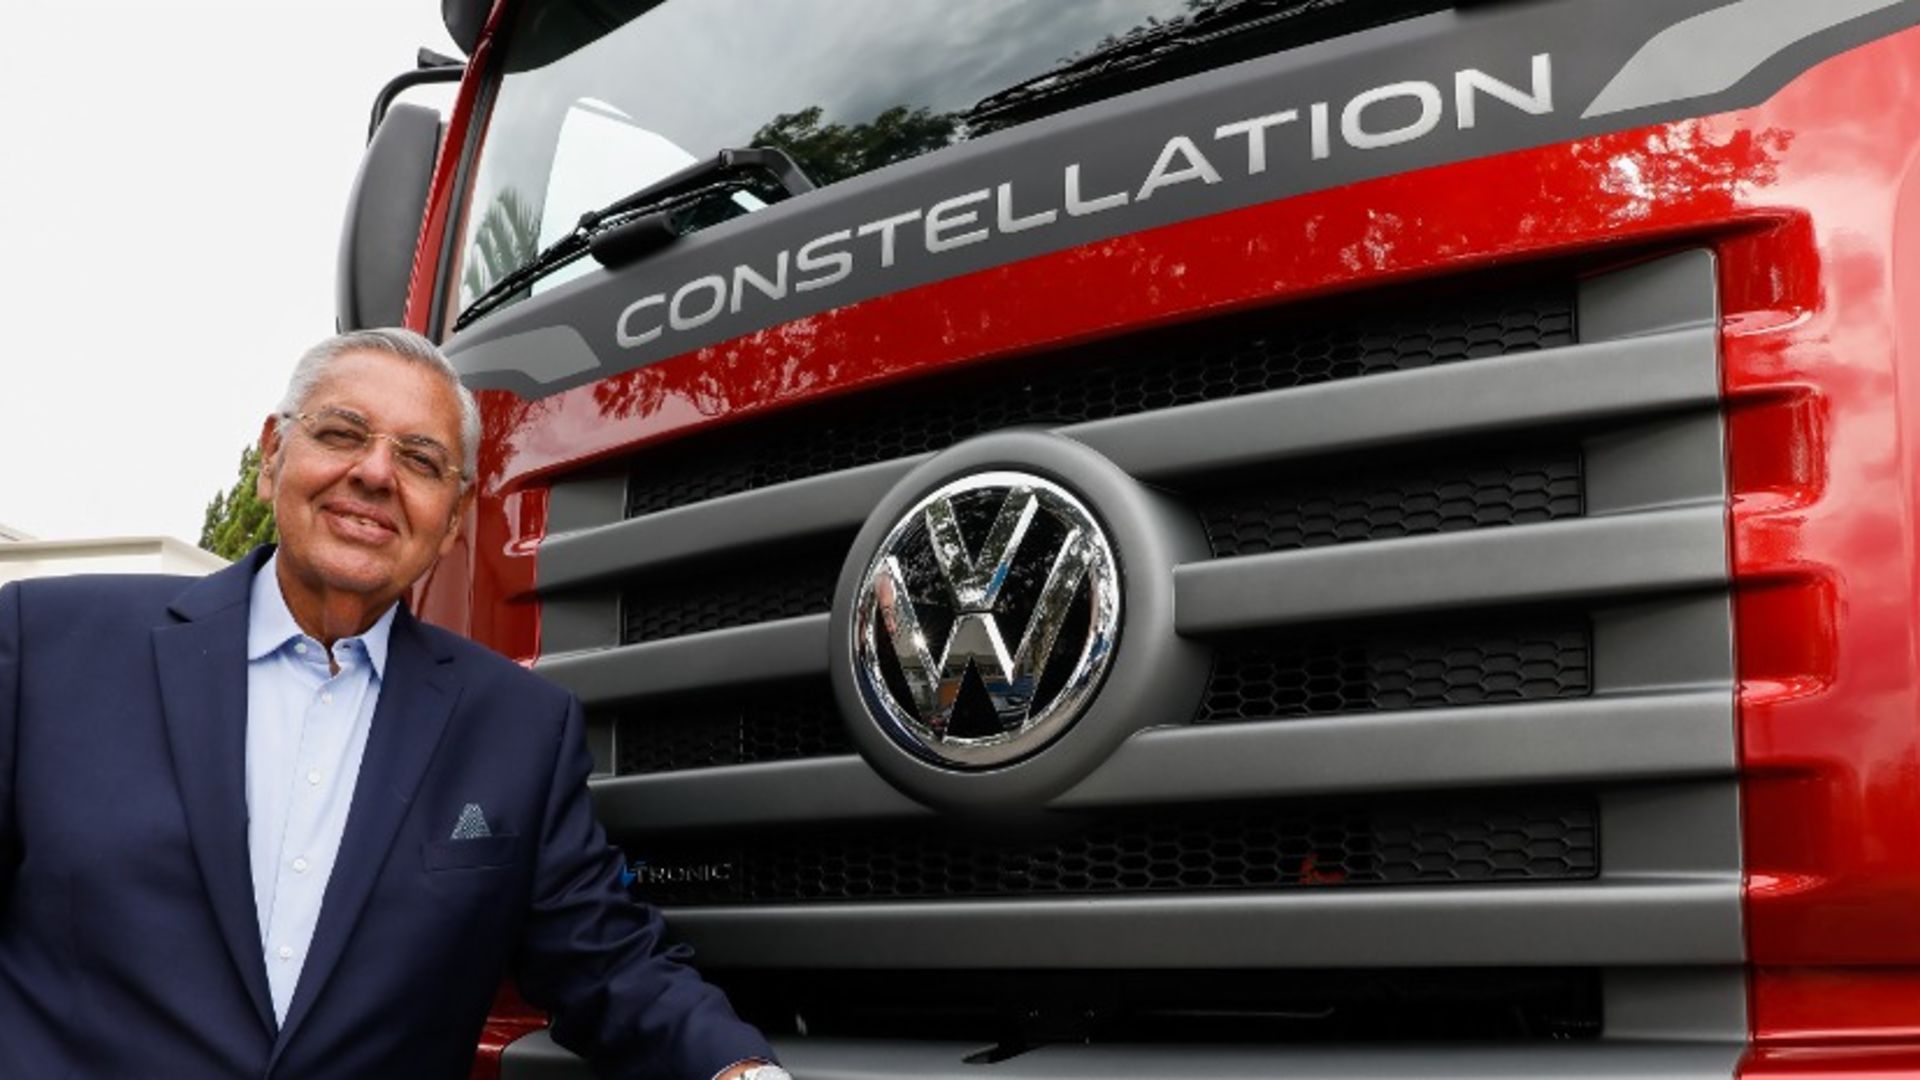 Volkswagen Truck & Bus continues to move forward with its internationalization process